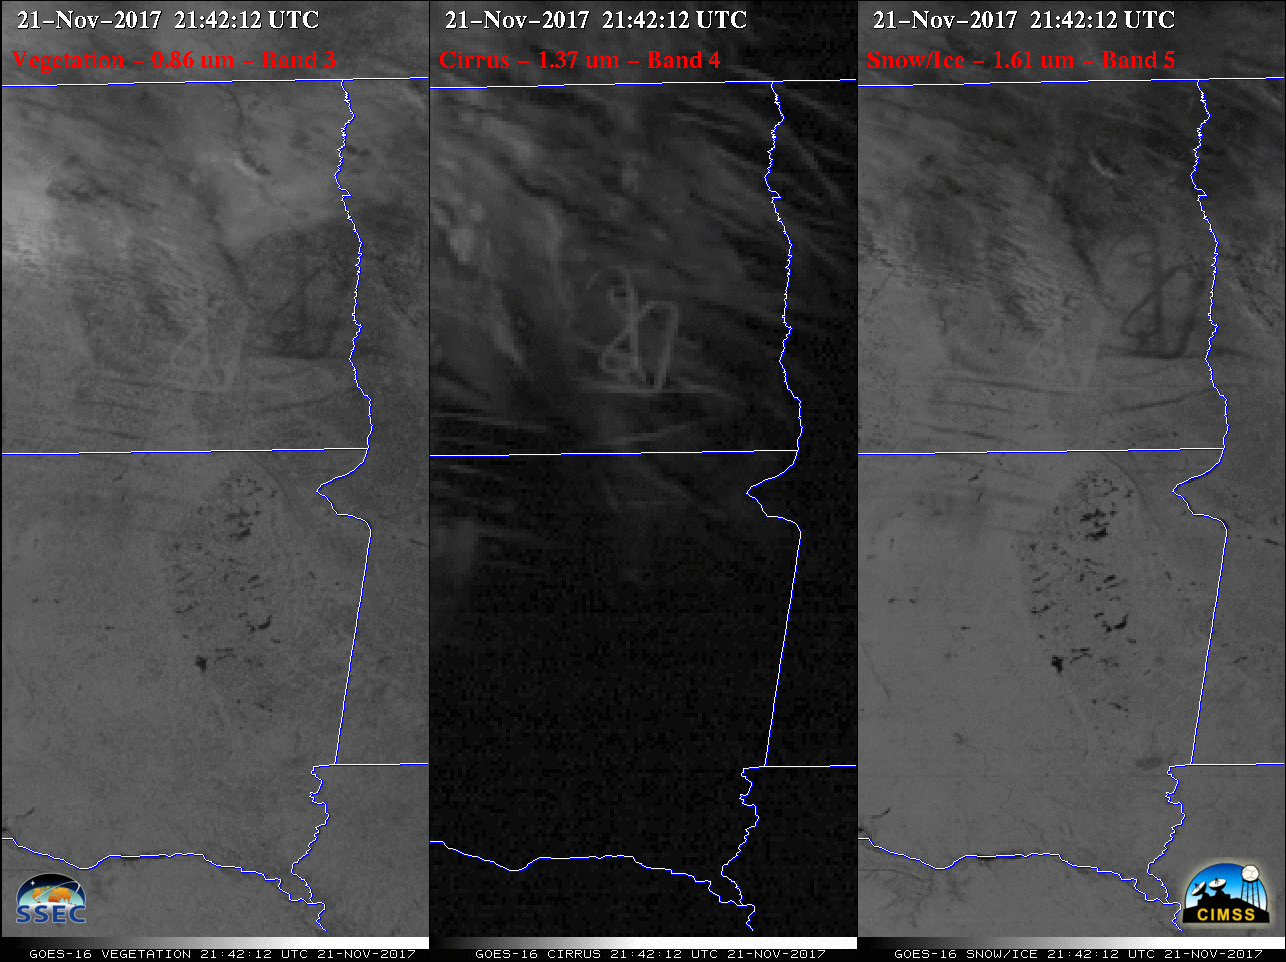 GOES-16 Vegetation (0.86 µm, left), Cirrus (1.37 µm, center) and Snow/Ice (1.61 µm, right) images [click to play animation]